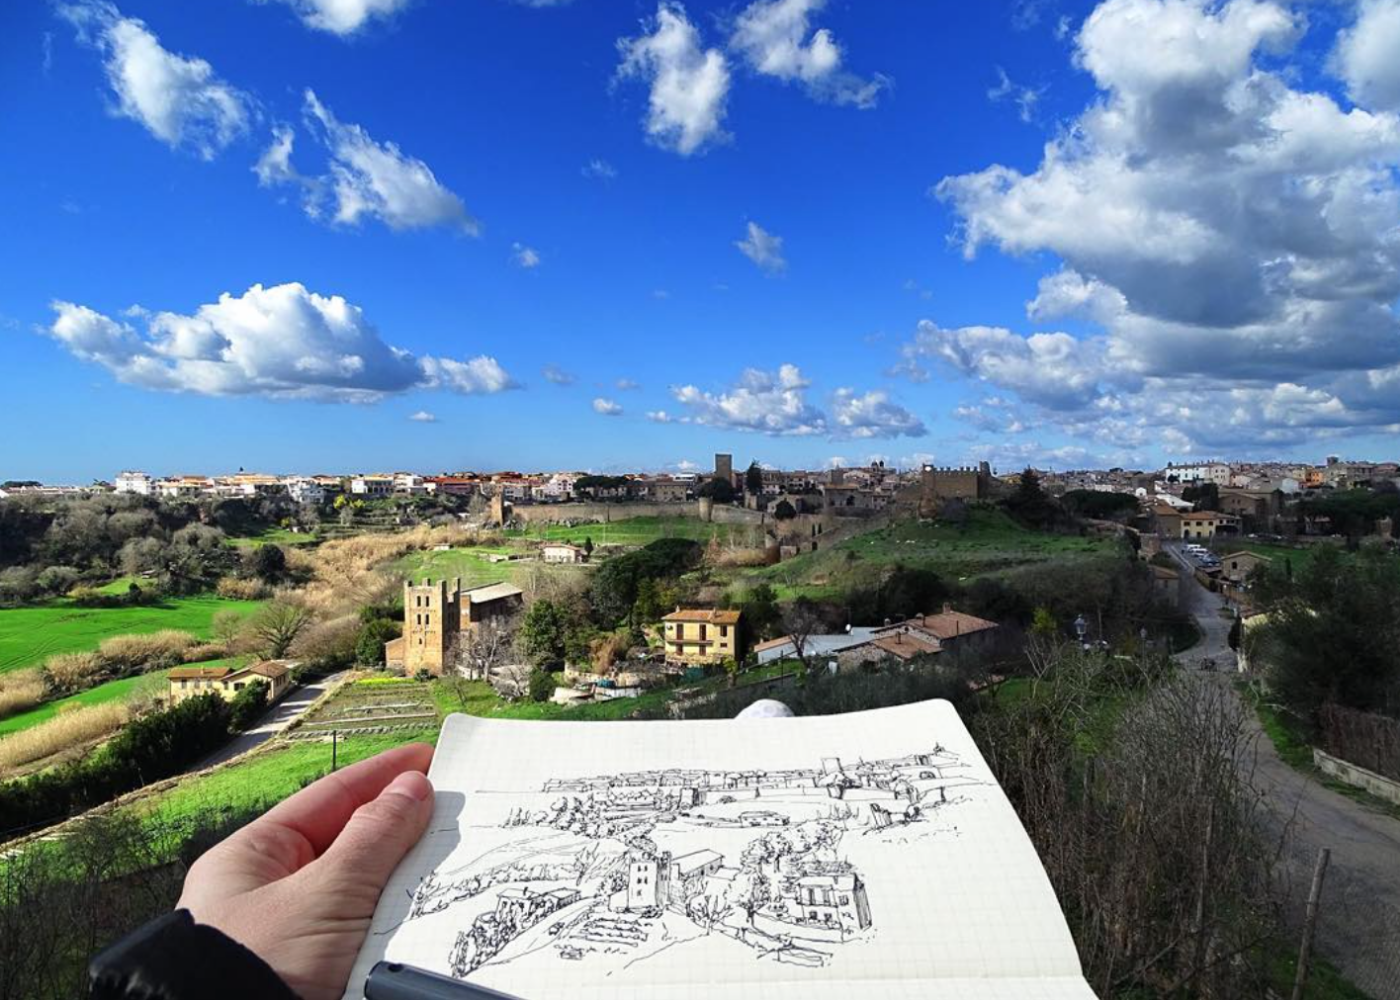 italy-tuscania-student-sketch-over-city